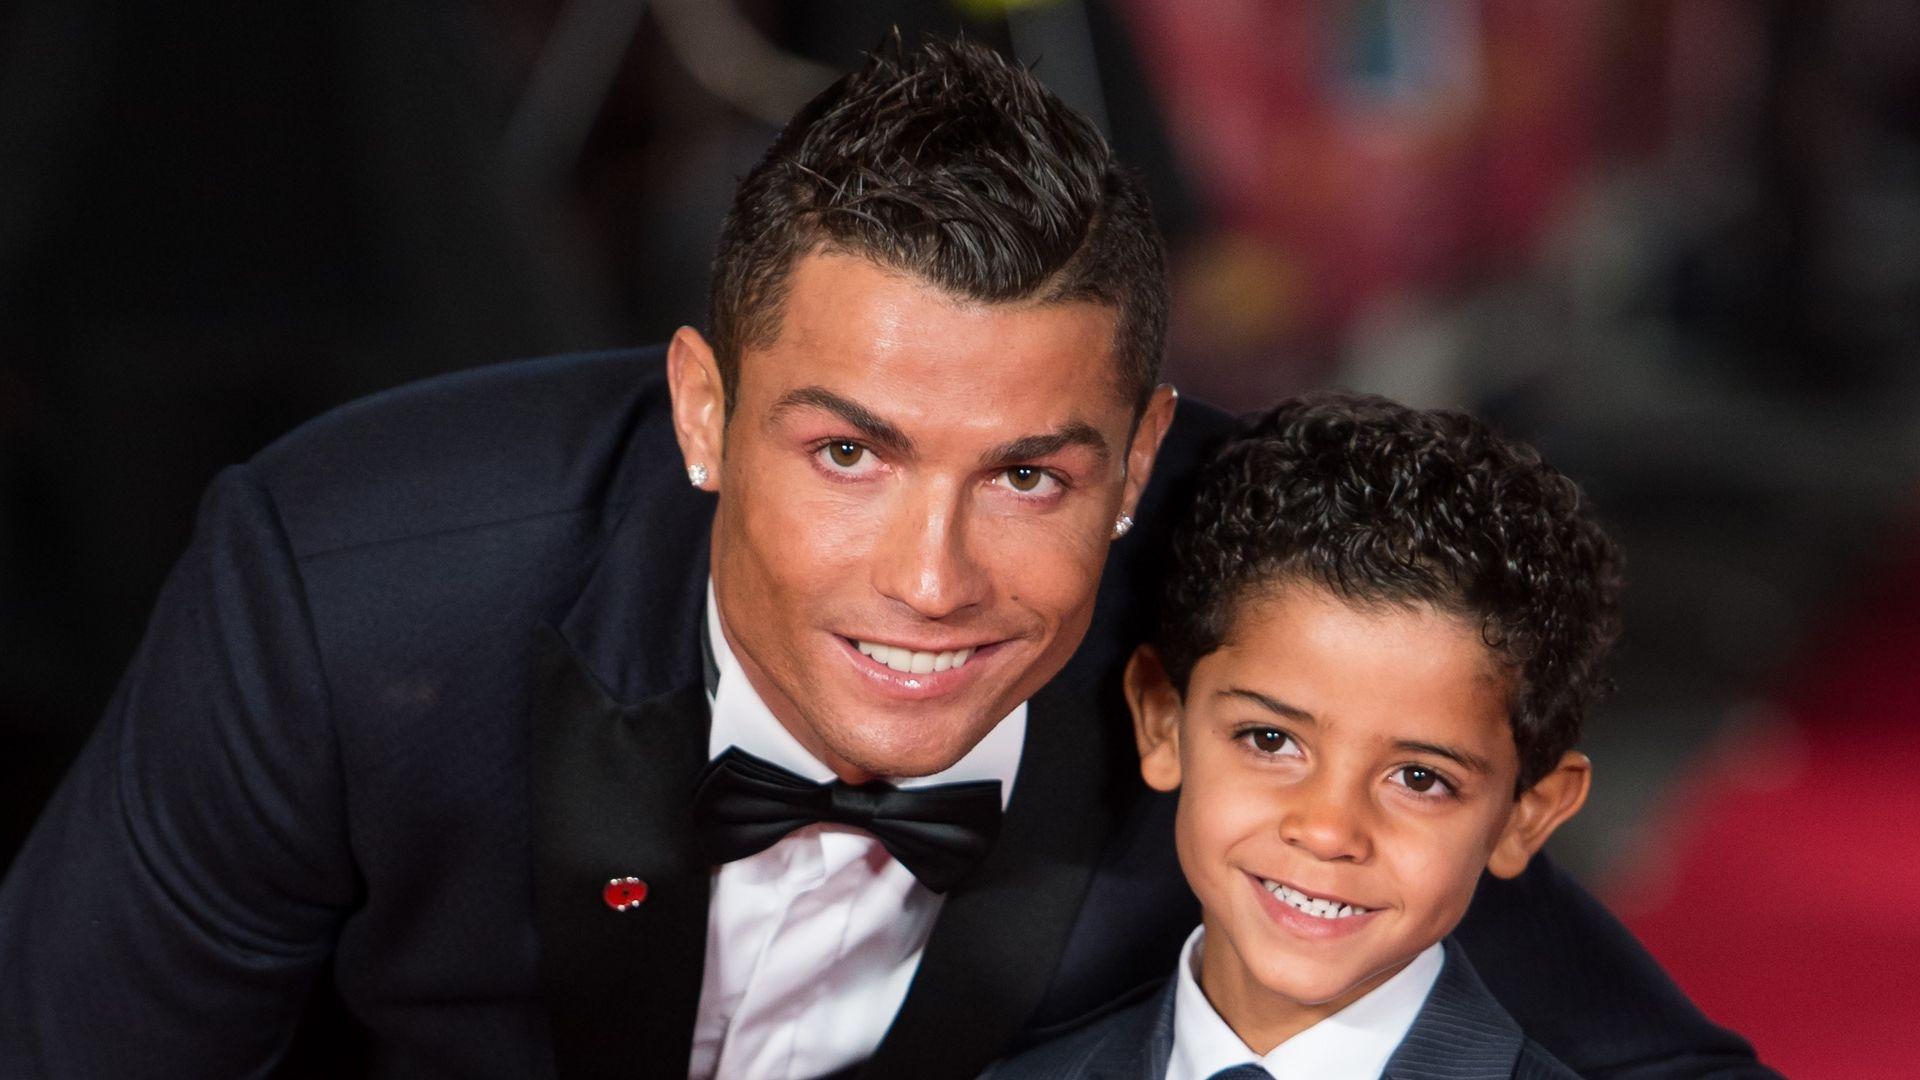 Cristiano Ronaldo: How many children does he have & what are their